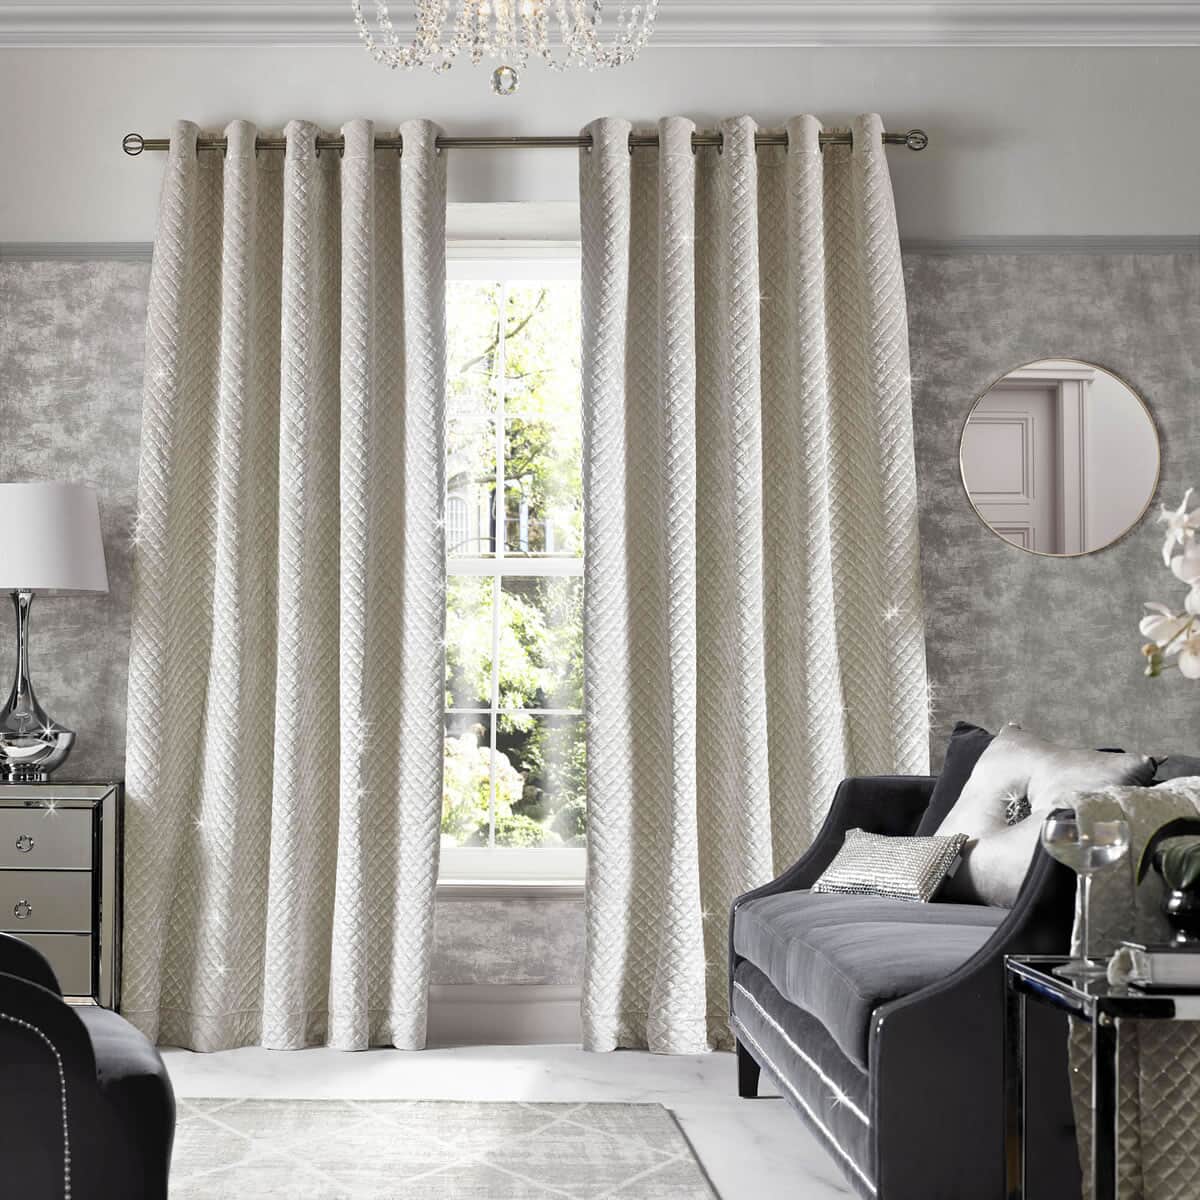 Kylie at Home Grazia Oyster Curtains large